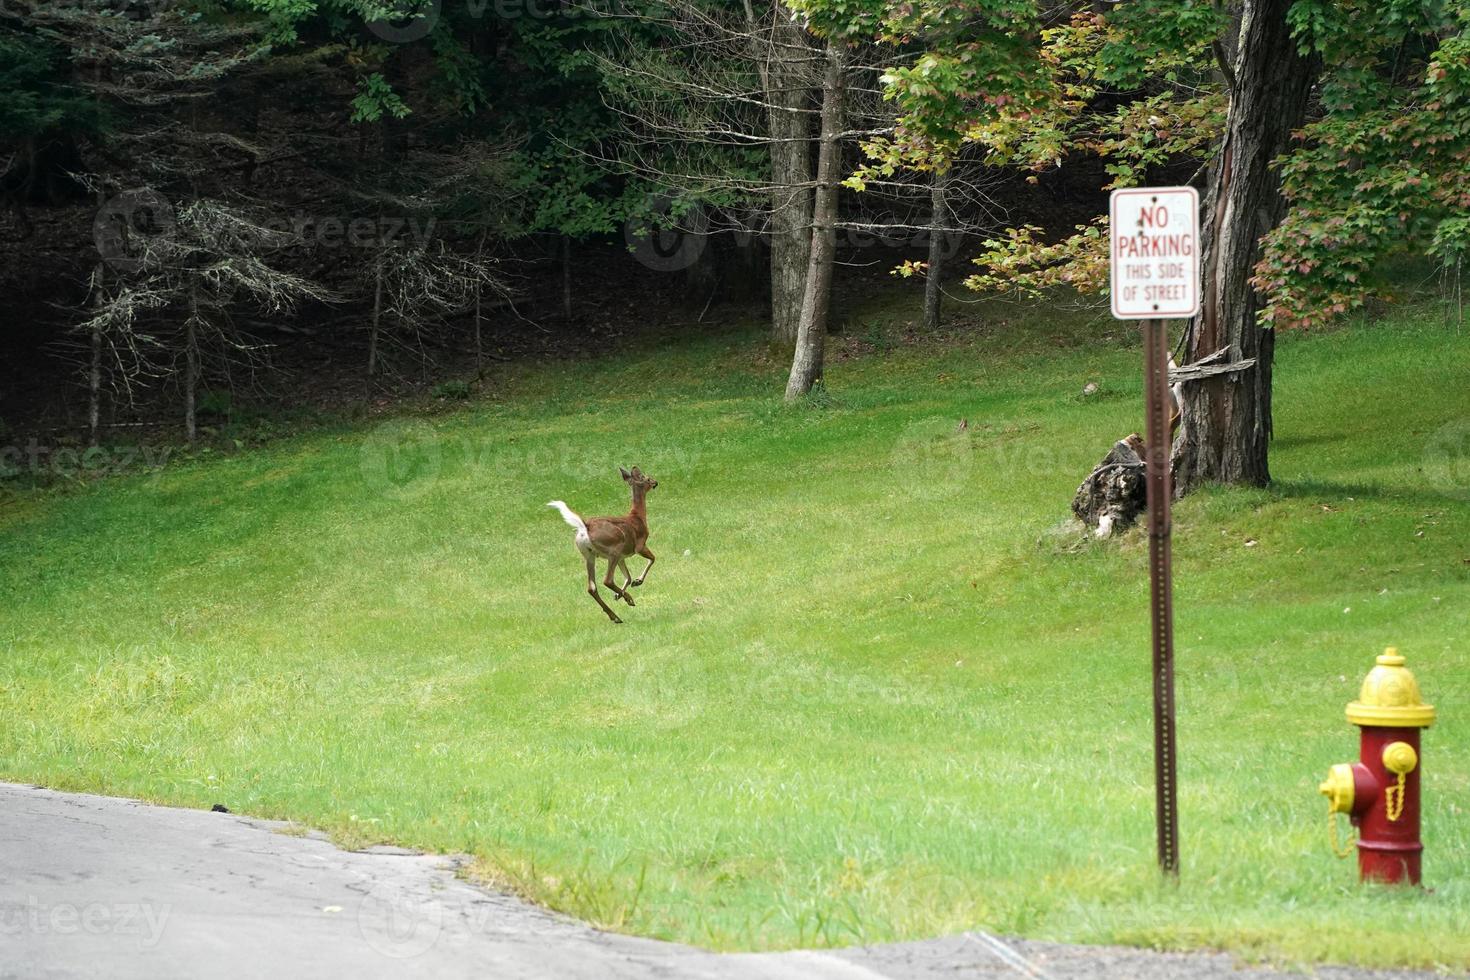 white tail deers running and crossing the road near the houses in new york state county countryside photo